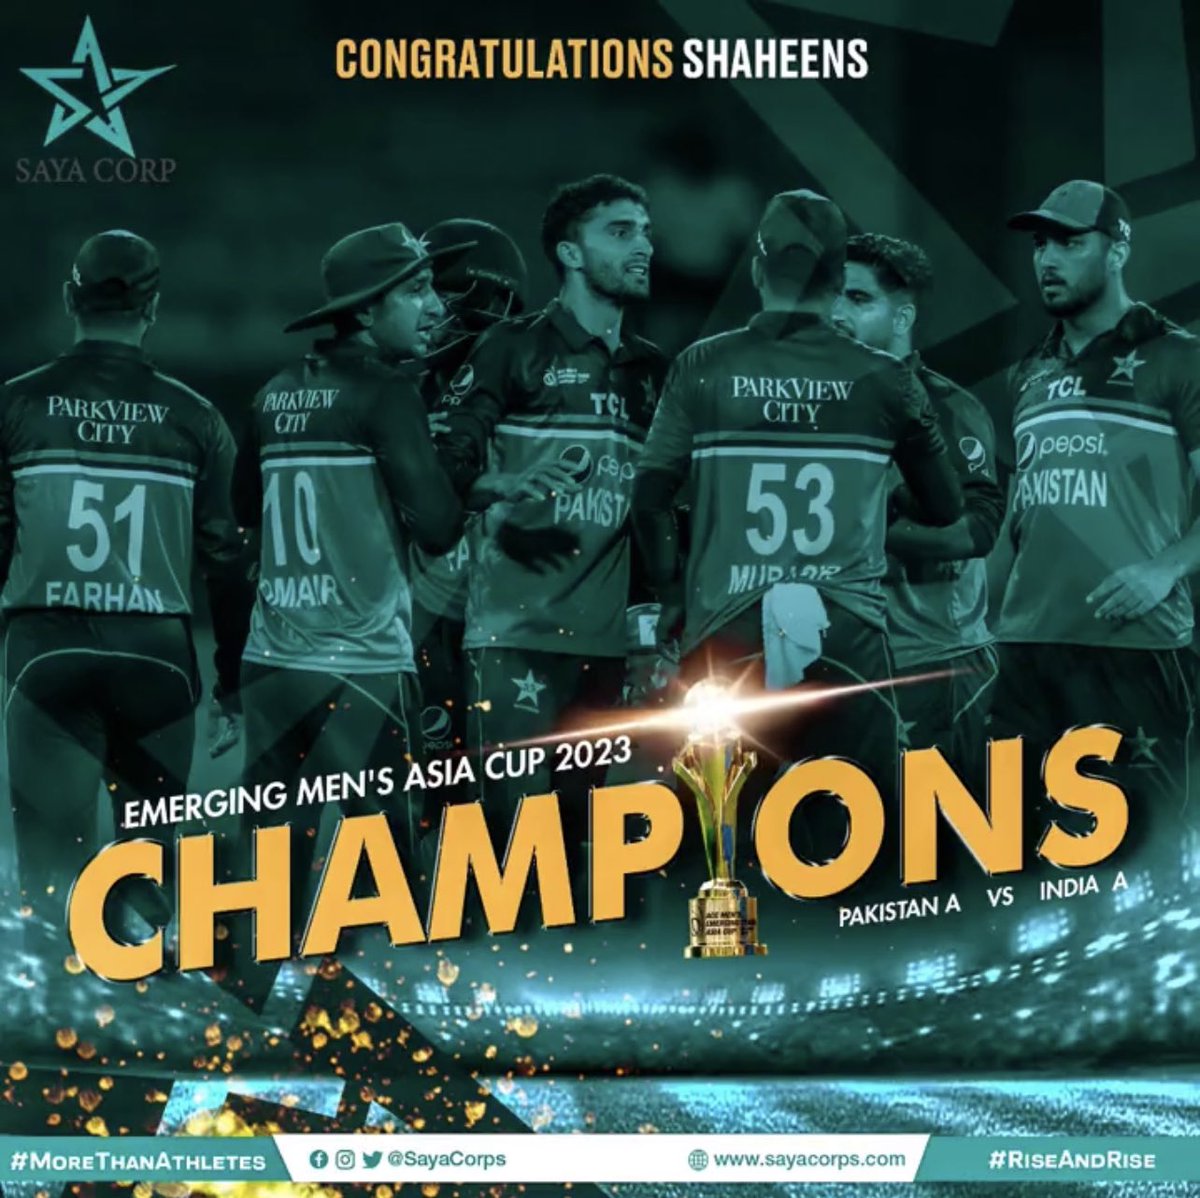 Bringing your top game in an all important final is what makes you a superstar and each of our emerging players is the real star. Kamaal kar diya larkon, continue the winning habit! 🏆🇵🇰 💚